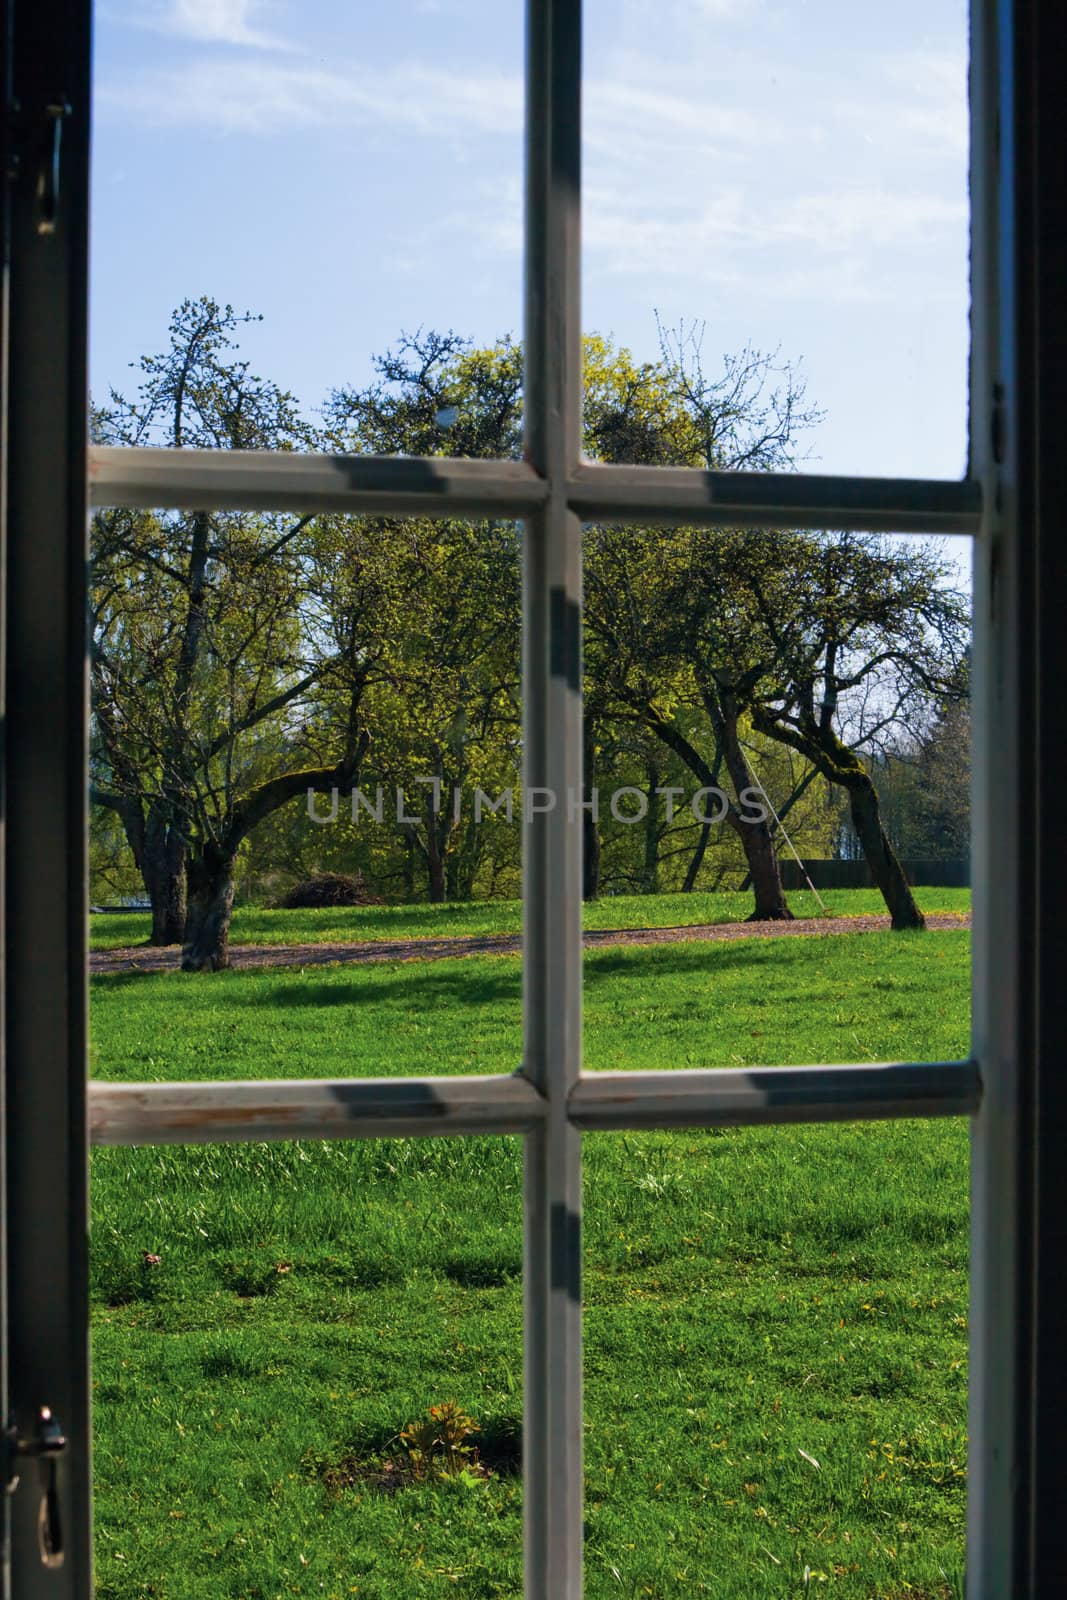 The view from the windows of the picturesque garden trees in the spring in Sweden